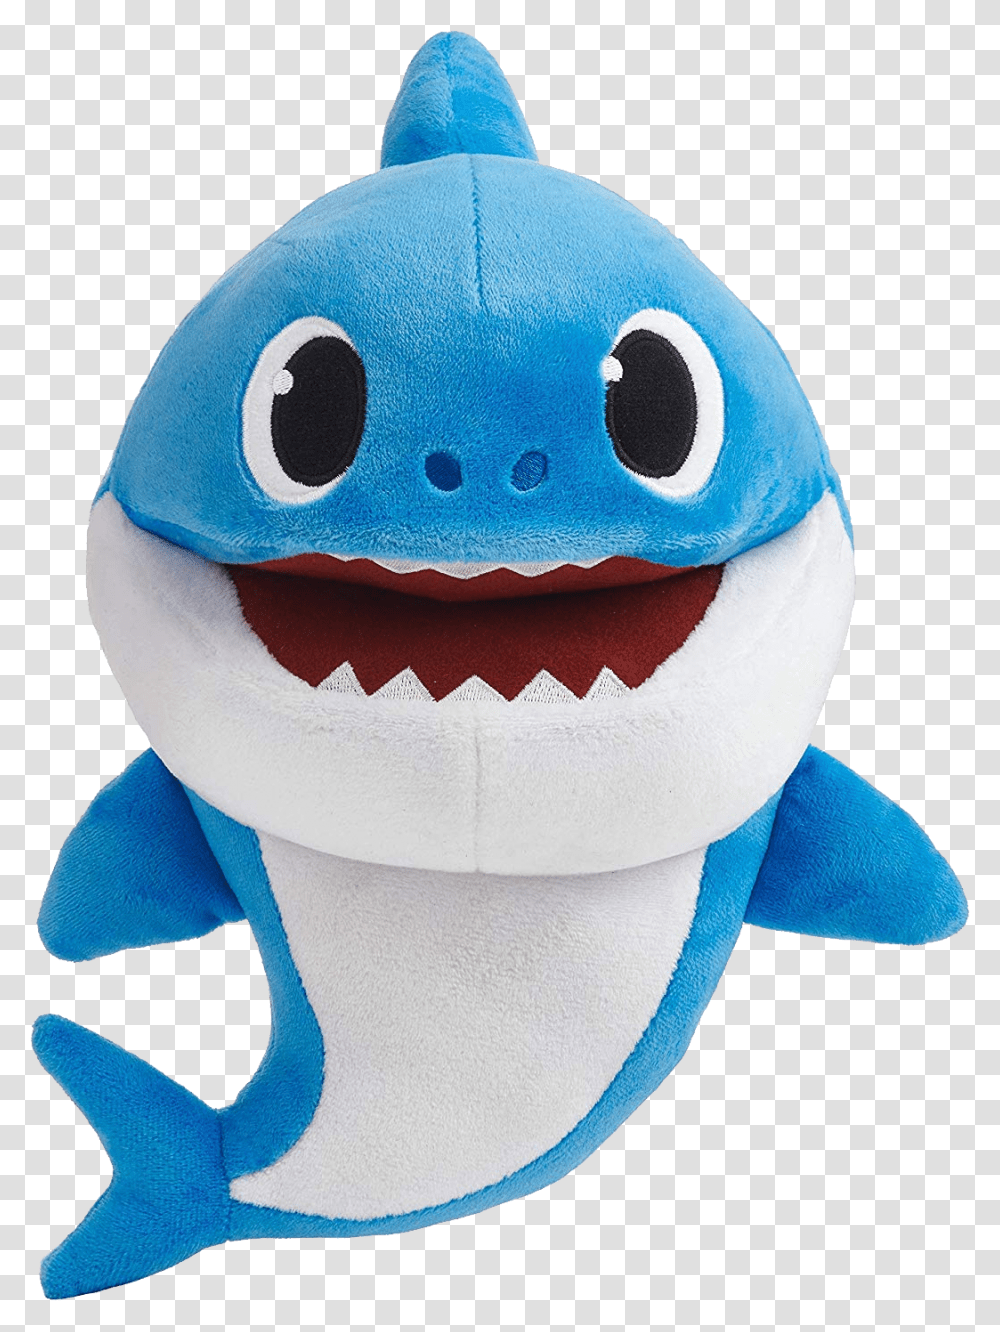 Baby Shark, Character, Plush, Toy, Mascot Transparent Png